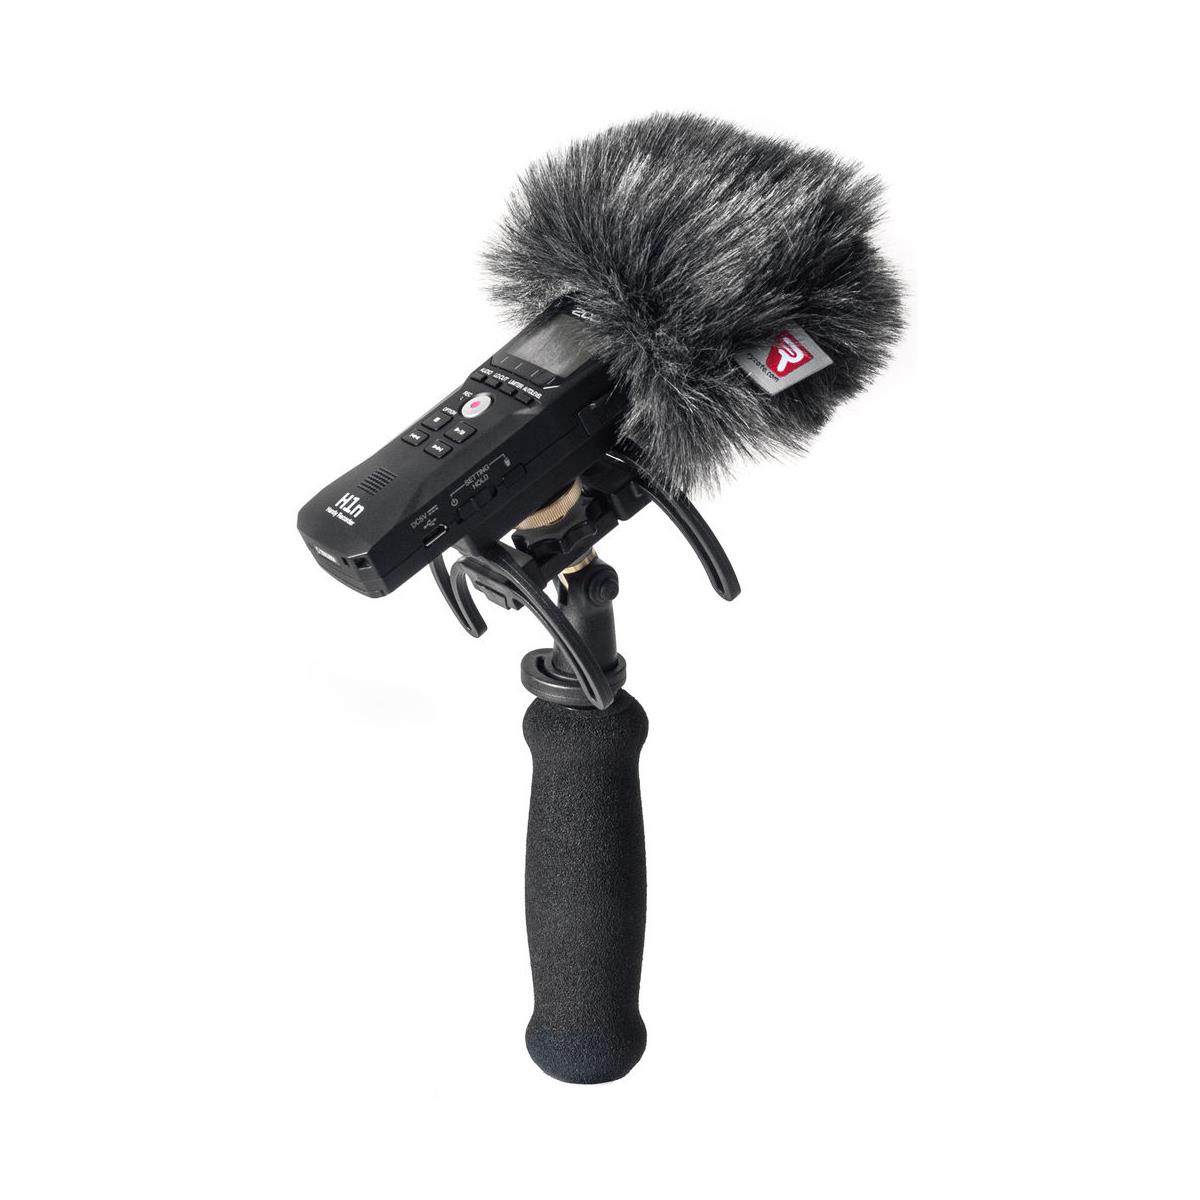 Image of Rycote Recorder Kit for Zoom H1n Handy Recorder